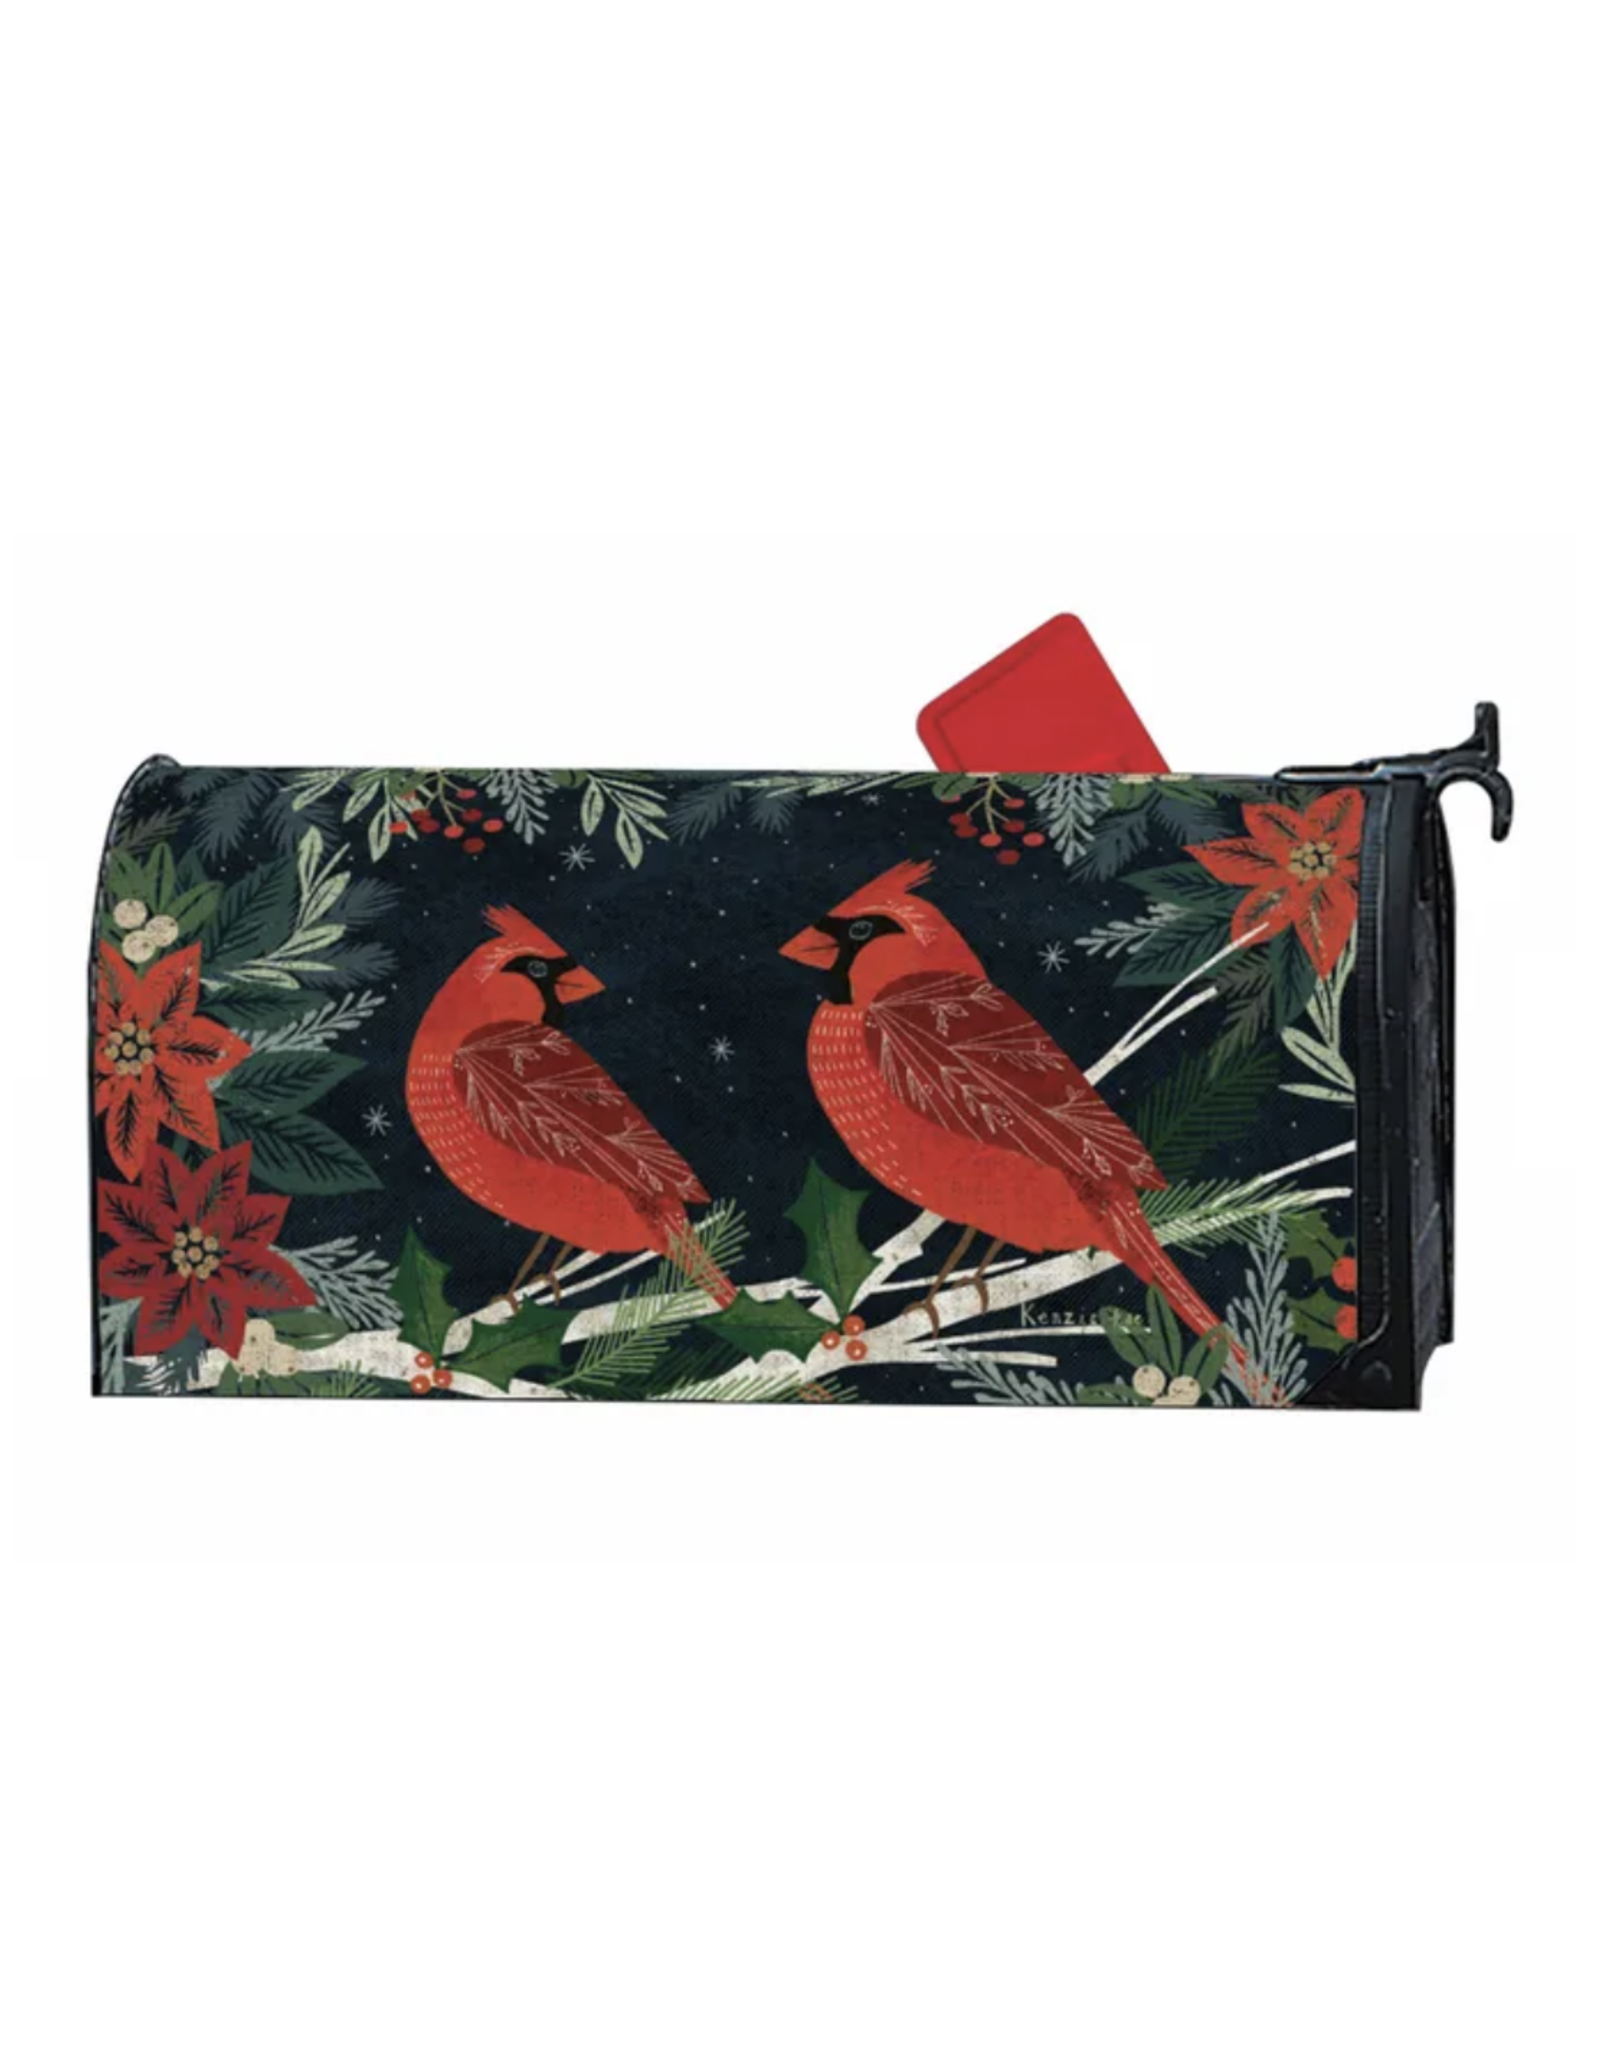 Studio M Cardinals and Berries Mailbox Cover